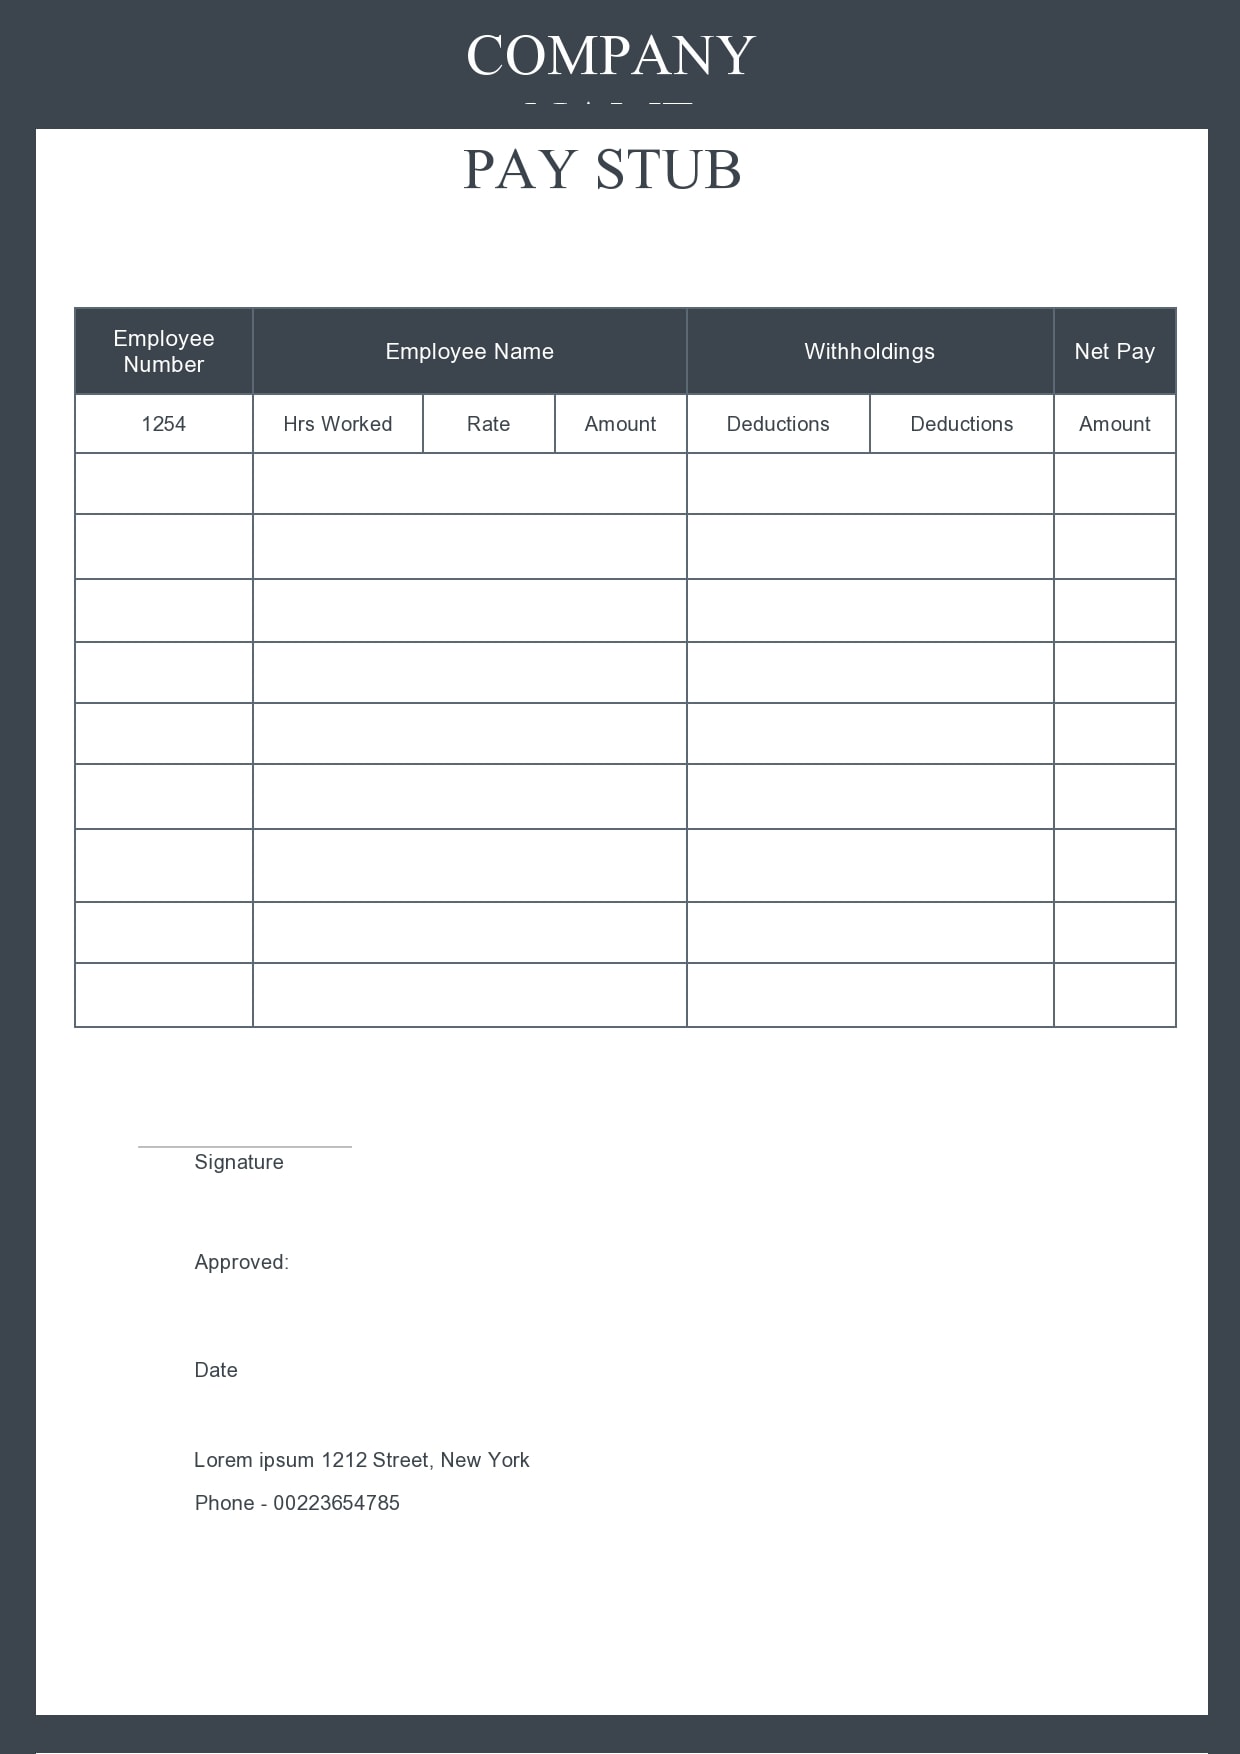 Pay stub template free download divolt download